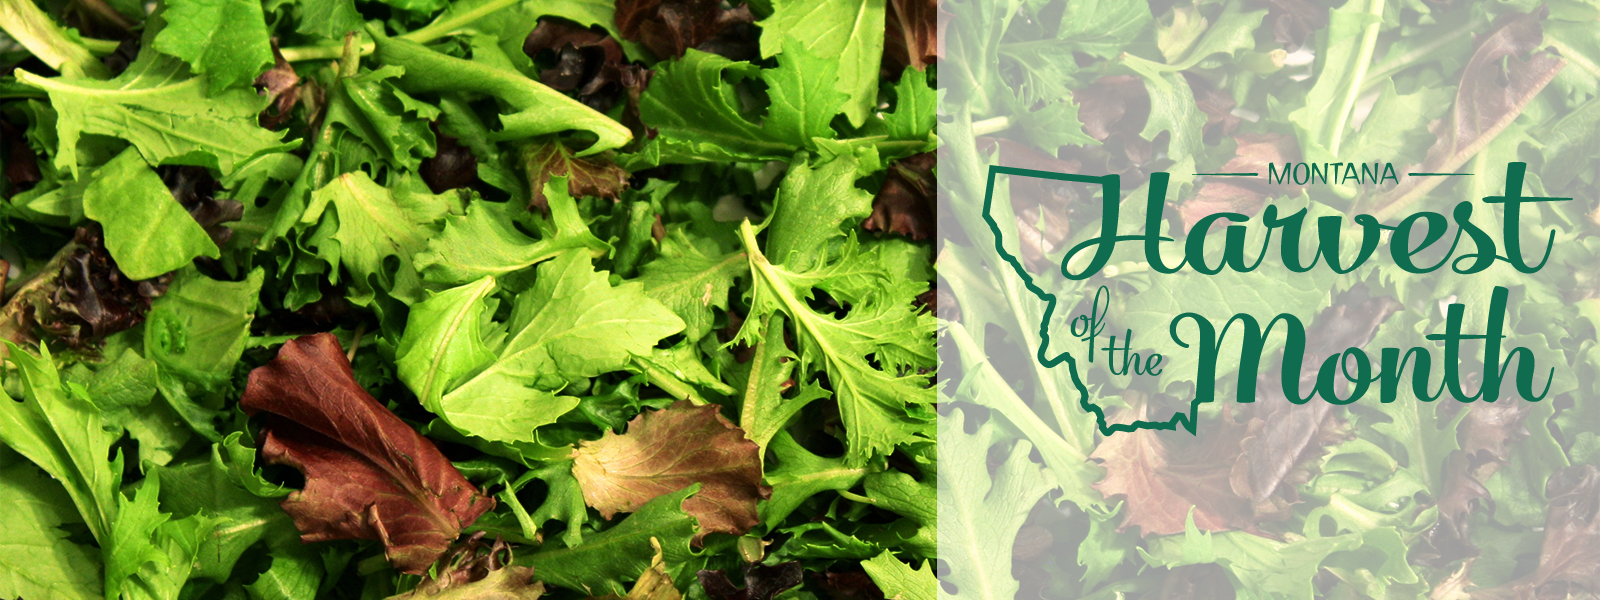 This month's harvest of the month is leafy greens!